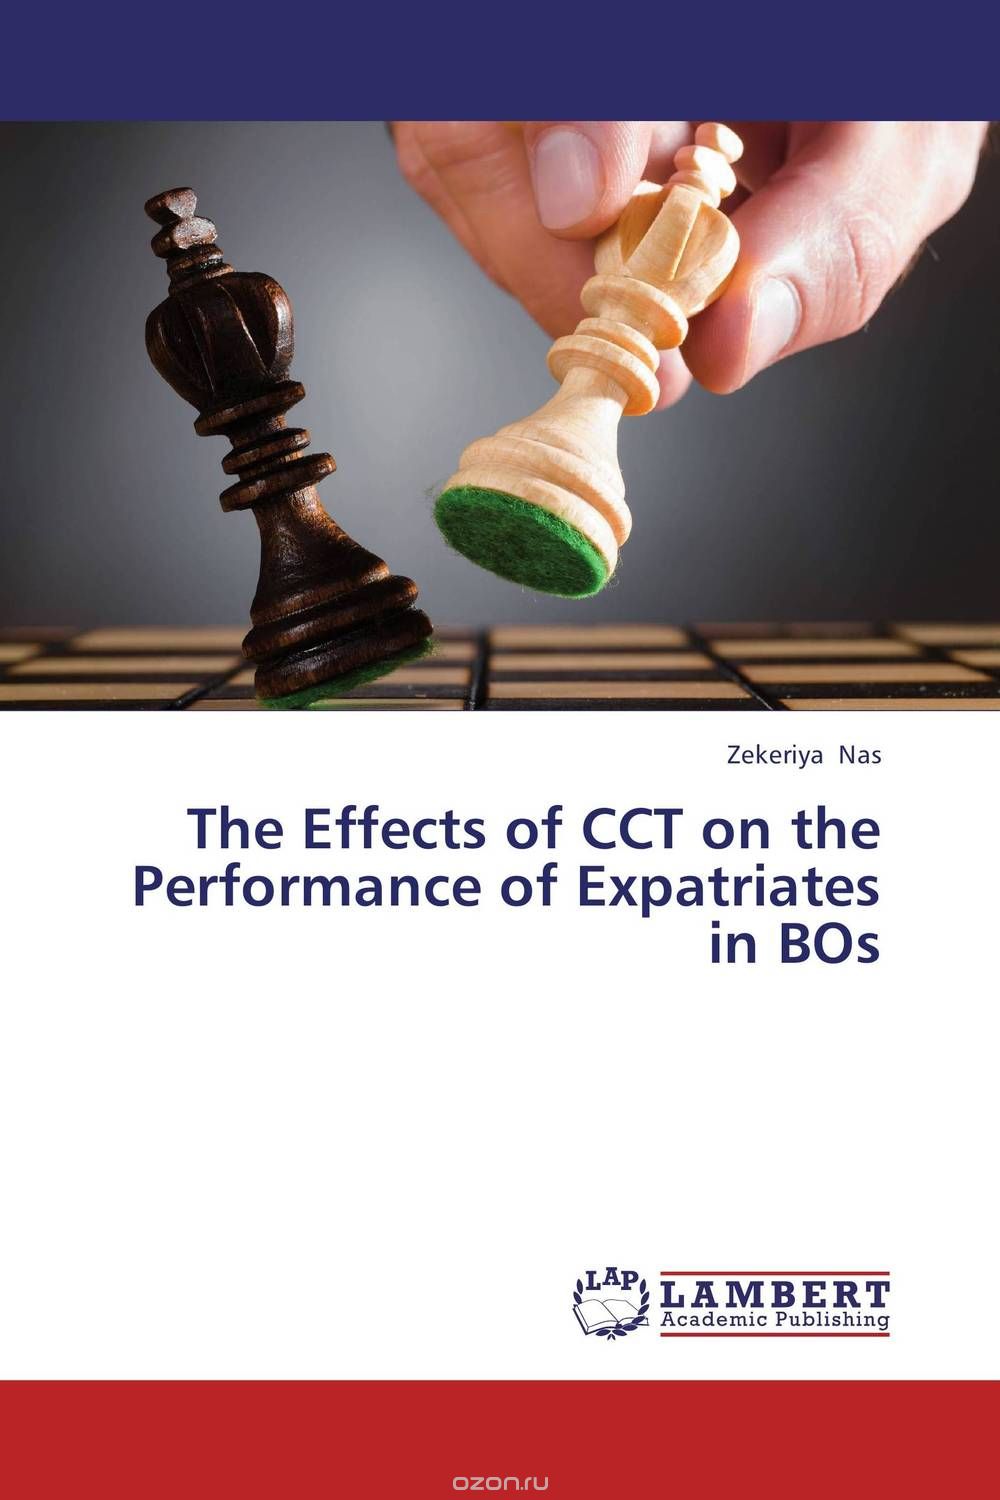 The Effects of CCT on the Performance of Expatriates in BOs